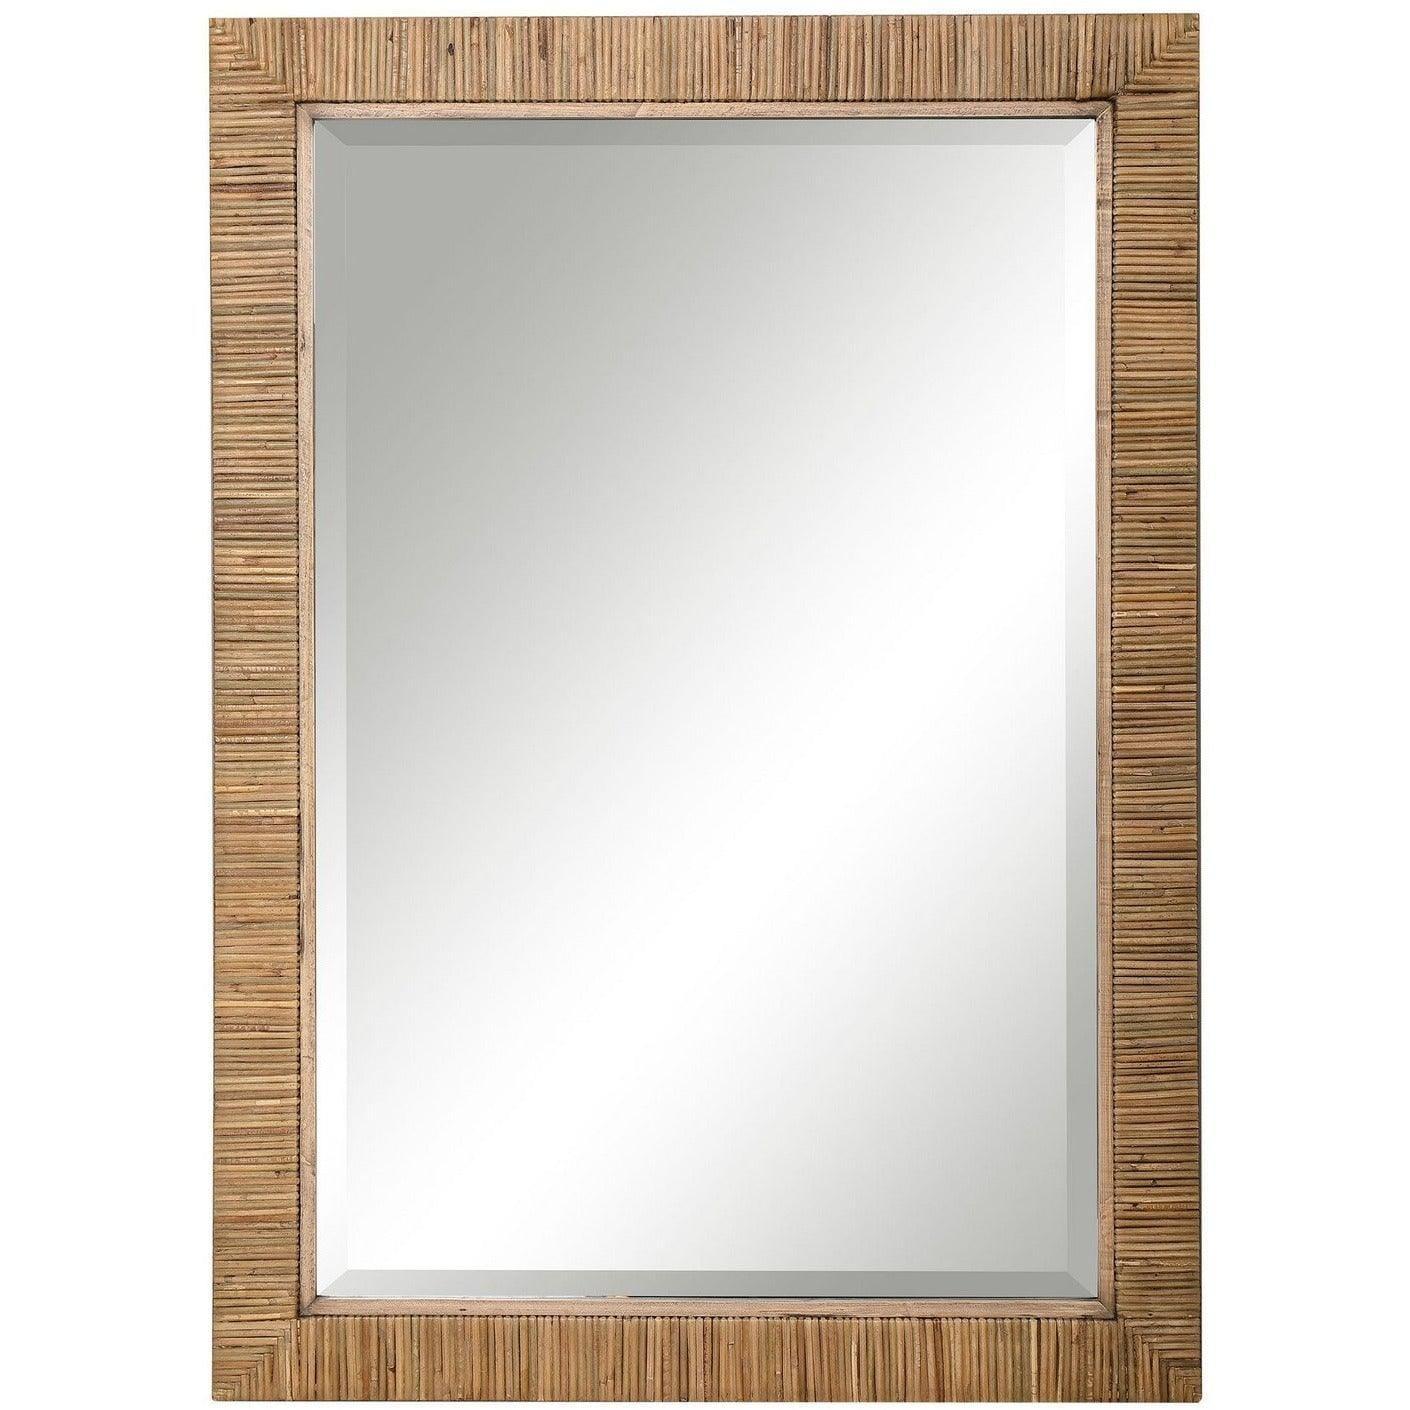 The Uttermost - Cape Mirror - 09671 | Montreal Lighting & Hardware